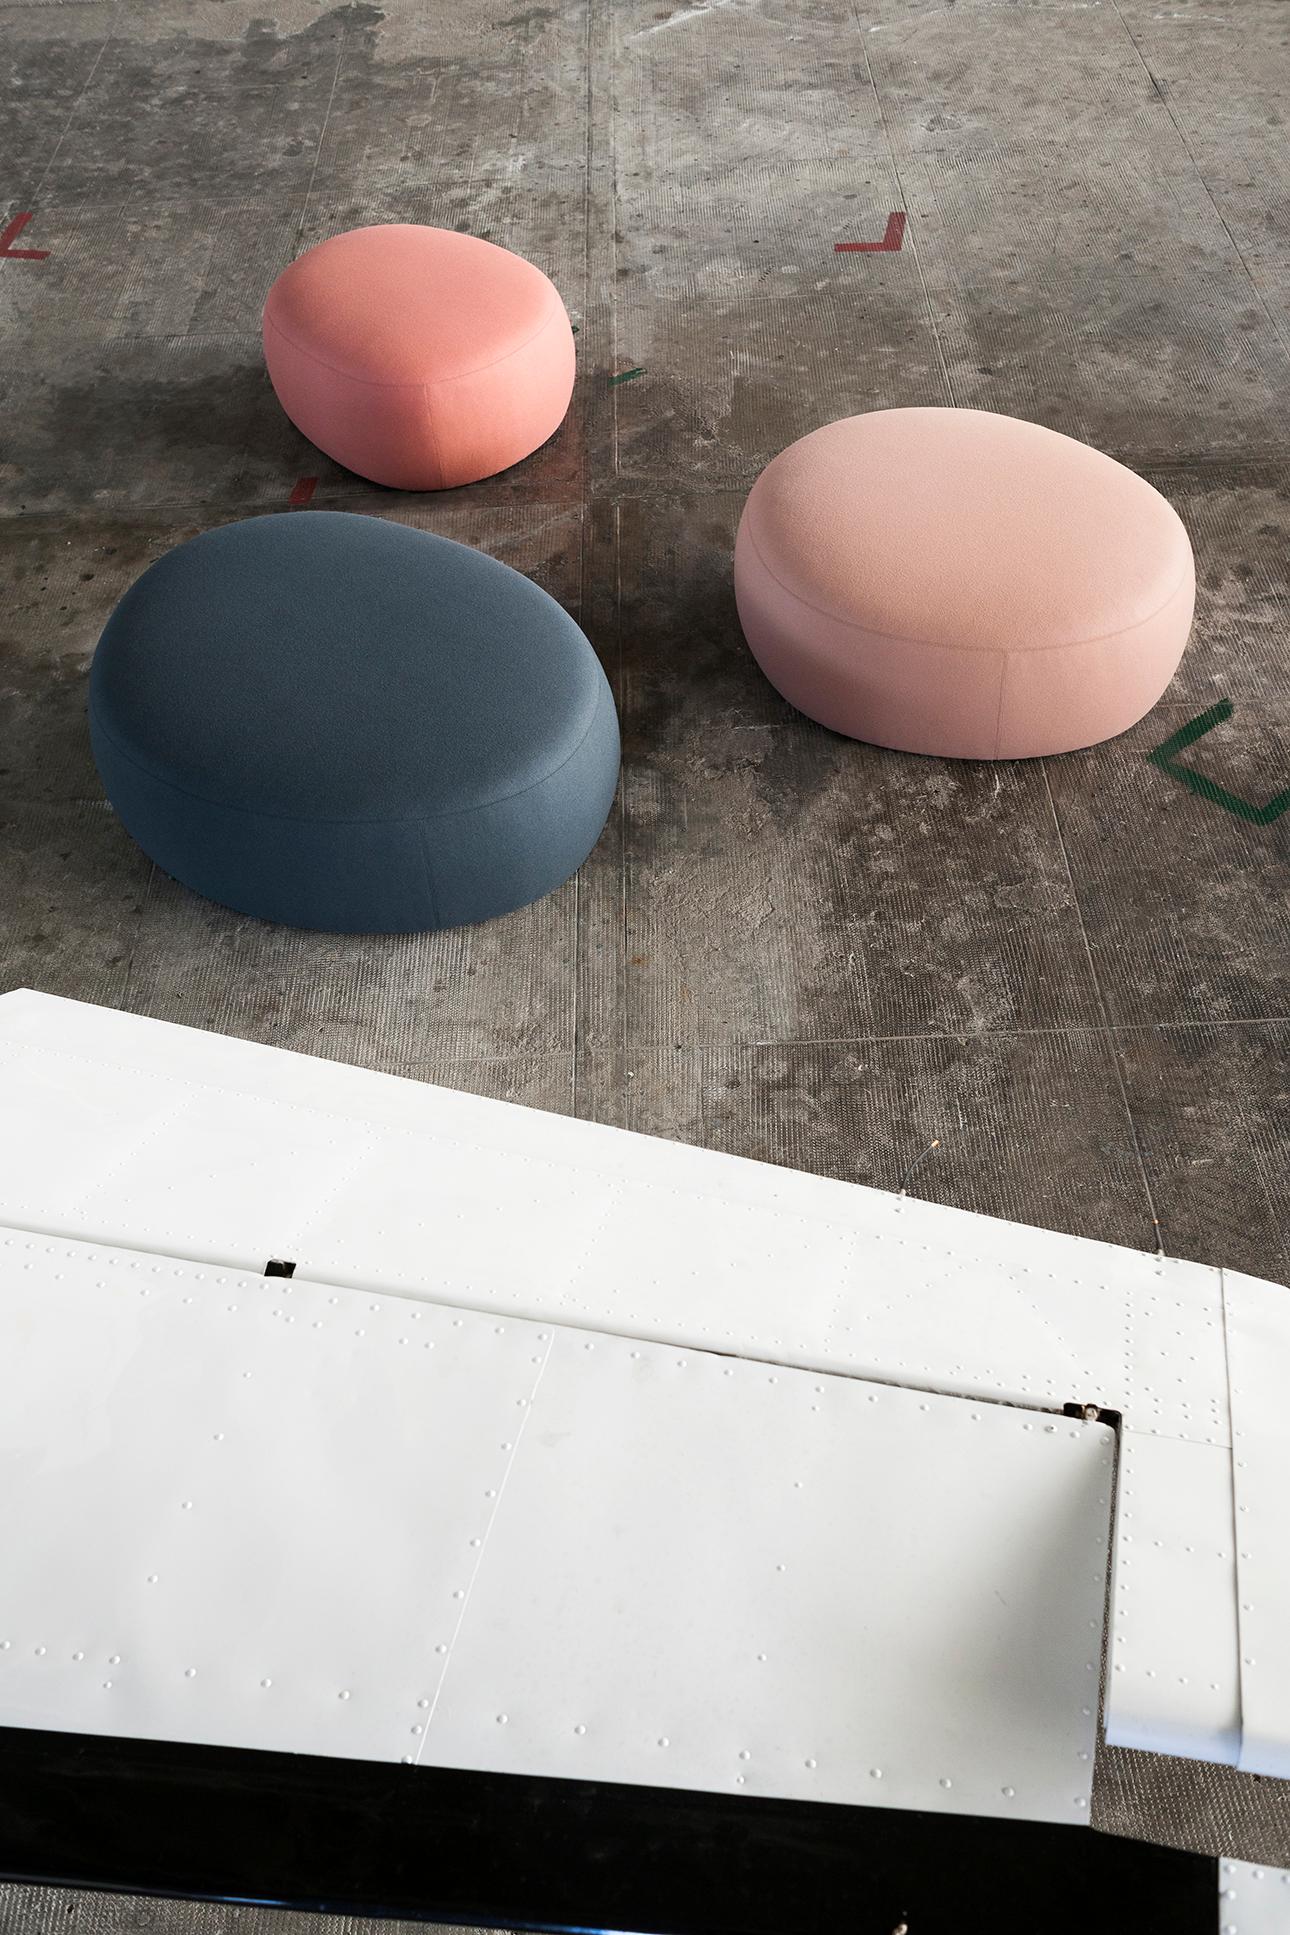 Tacchini Medium Matera Ottoman in thuya fabric by Gordon Guillaumier. Explore new creative scenarios in an imaginary tour of the extraordinary urban ecosystem – the Sassi di Matera. Here, the stratification of eras displays the continuity of past